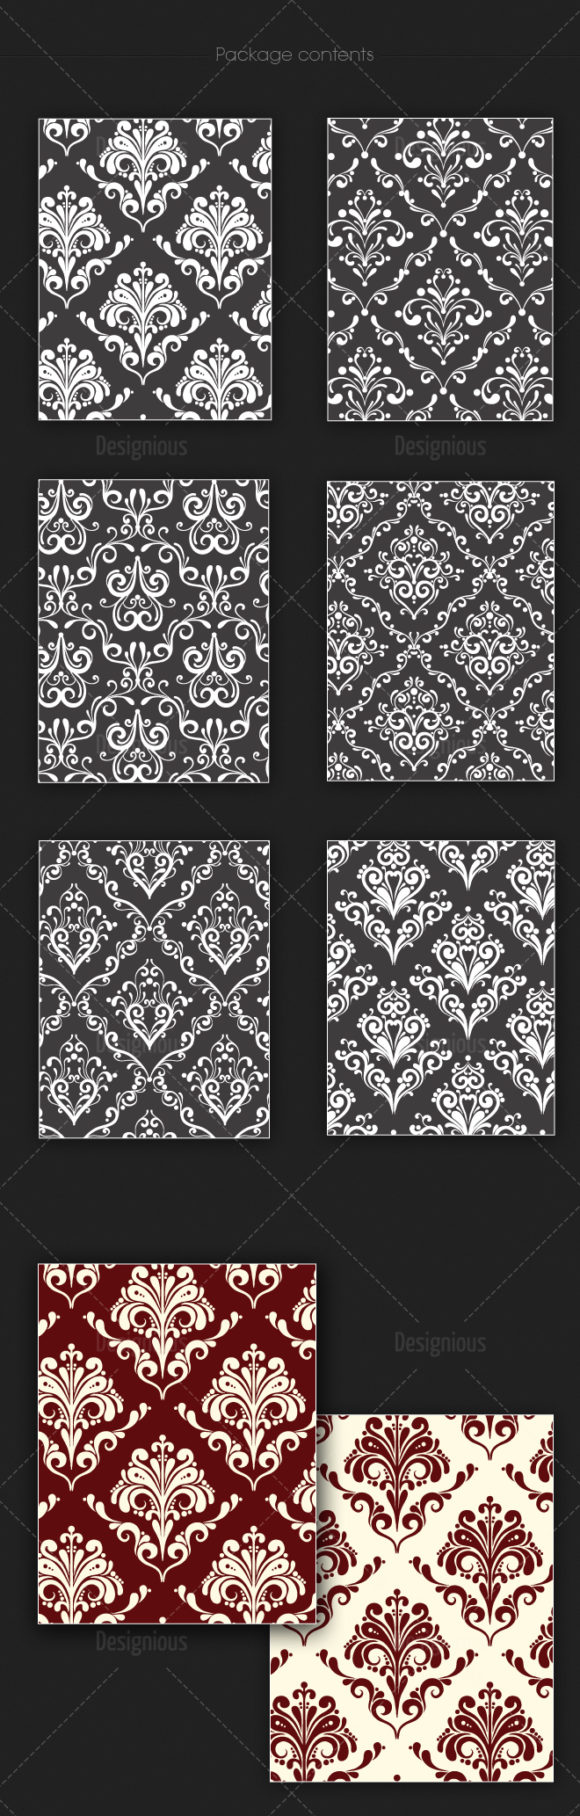 Seamless Patterns Vector Pack 122 2